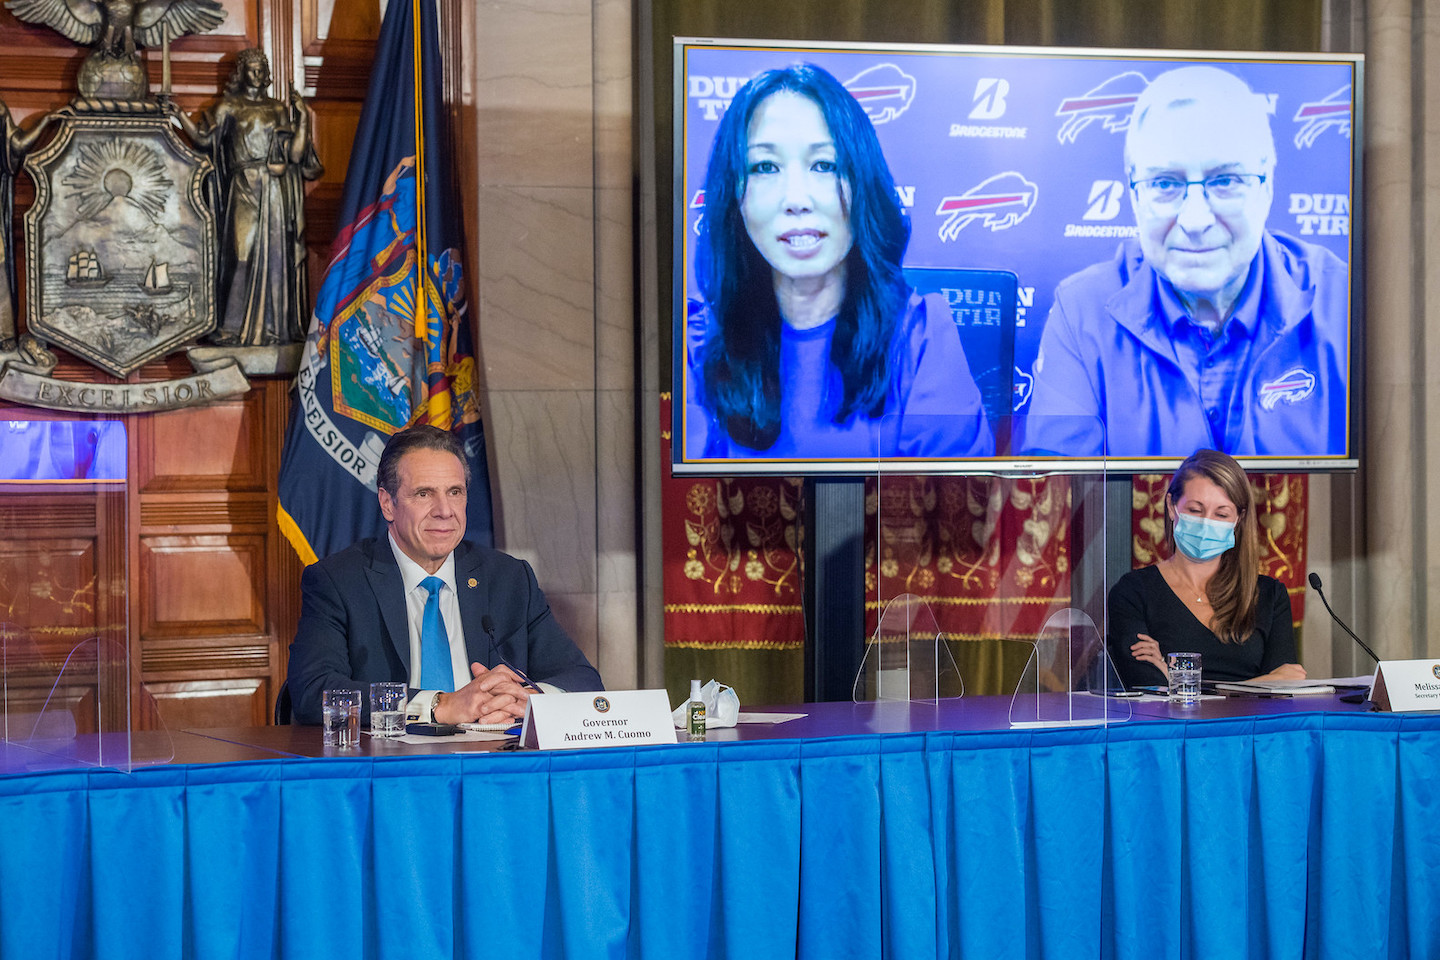 Gov. Andrew Cuomo joined with Buffalo Bills owners Terry and Kim Pegula to announce a pilot program for limited seating up 6,700 fans to be allowed at Bills Stadium in upcoming Buffalo Bills home playoff game. (Photo by Darren McGee/Office of Gov. Andrew M. Cuomo)